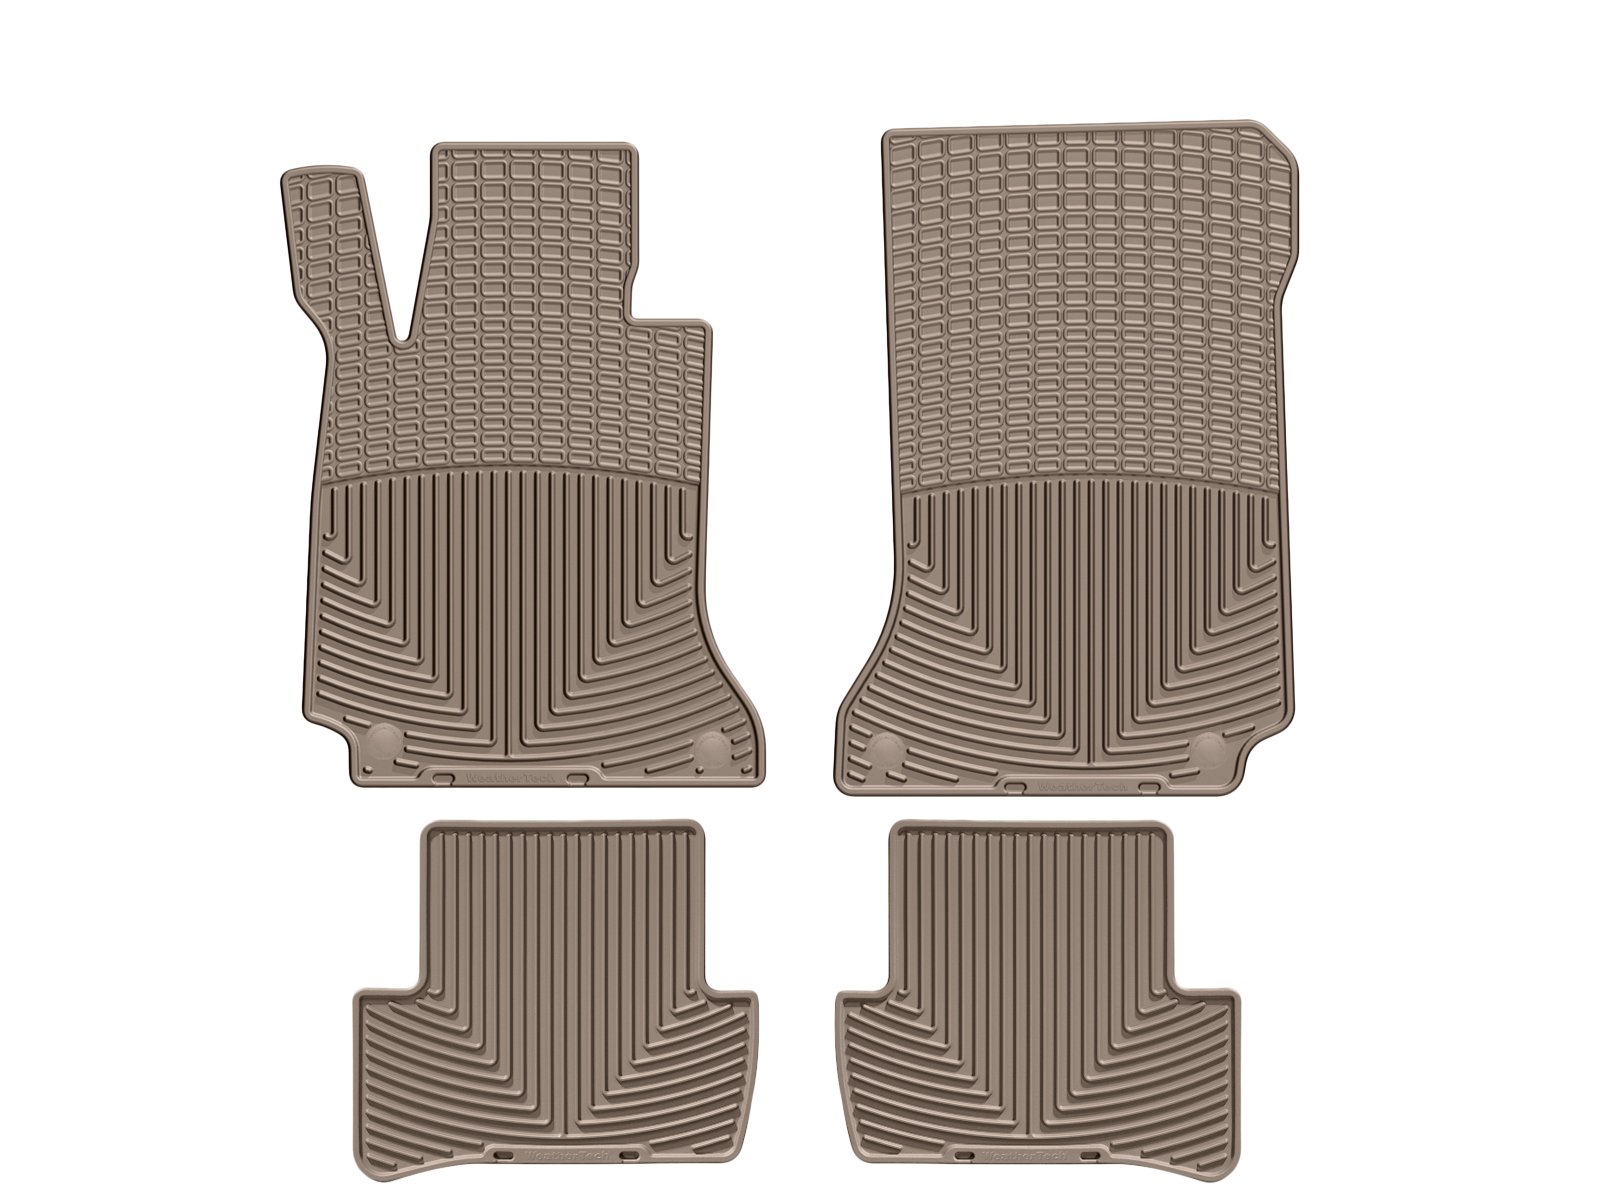 WeatherTech All-Weather Floor Mats for Mercedes C 63 AMG, C-Class - 1st & 2nd Row (MB W204 T), Tan